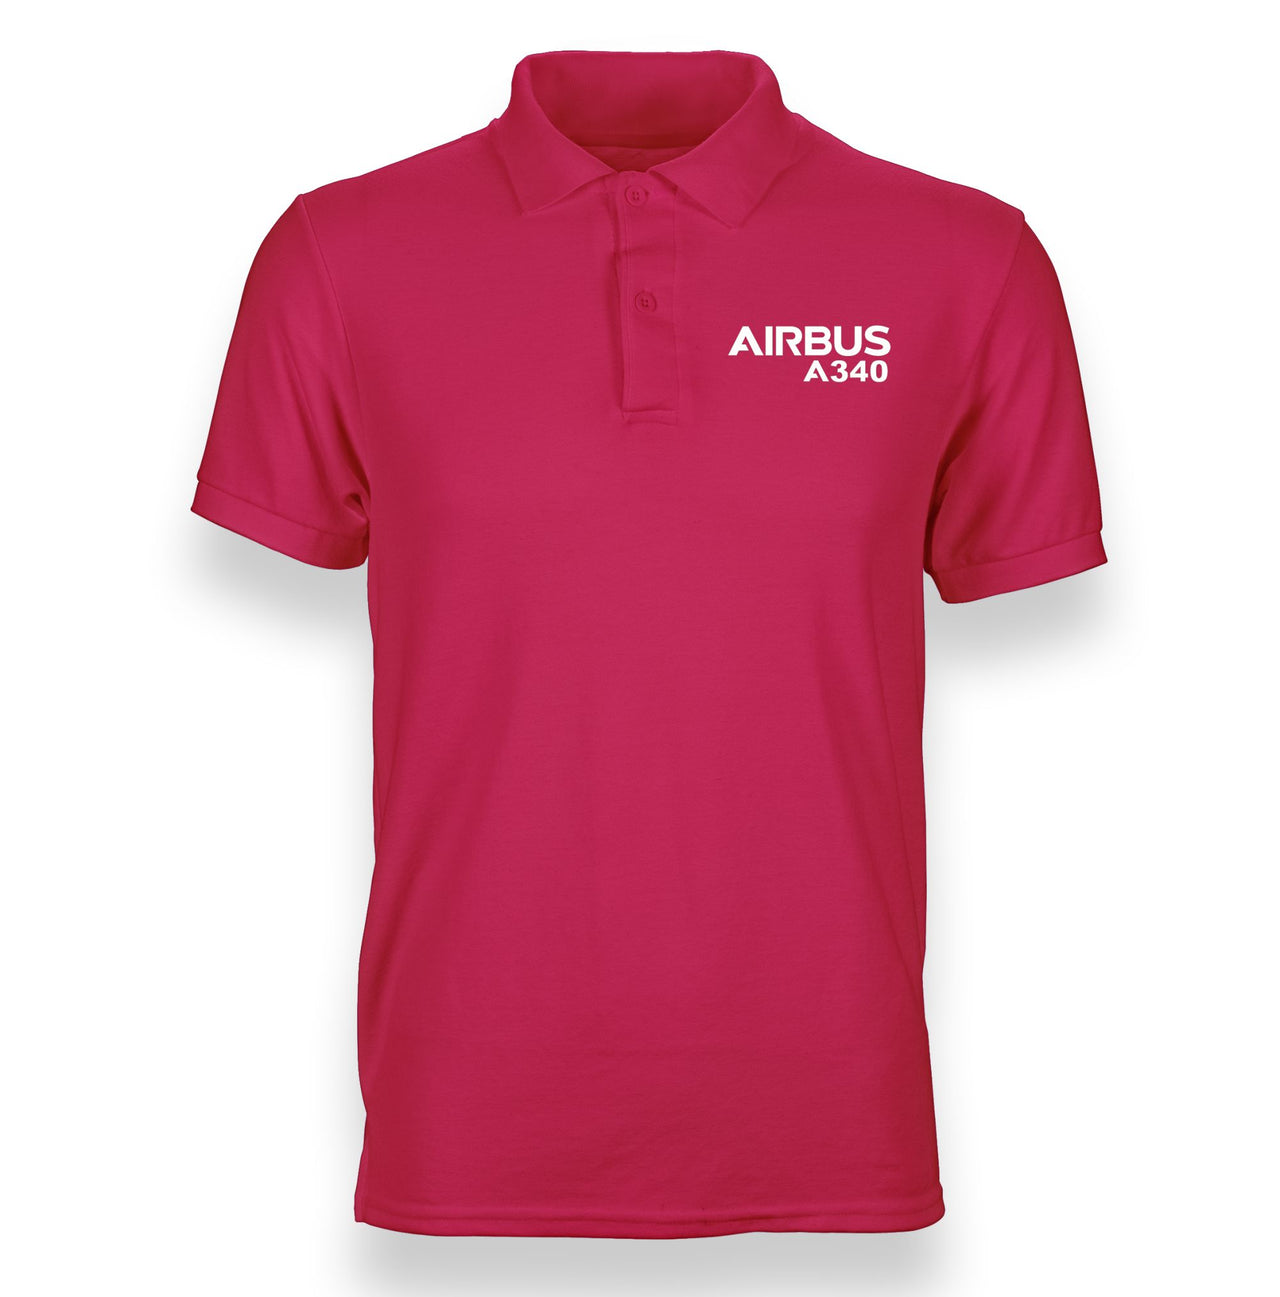 Airbus A340 & Text Designed "WOMEN" Polo T-Shirts